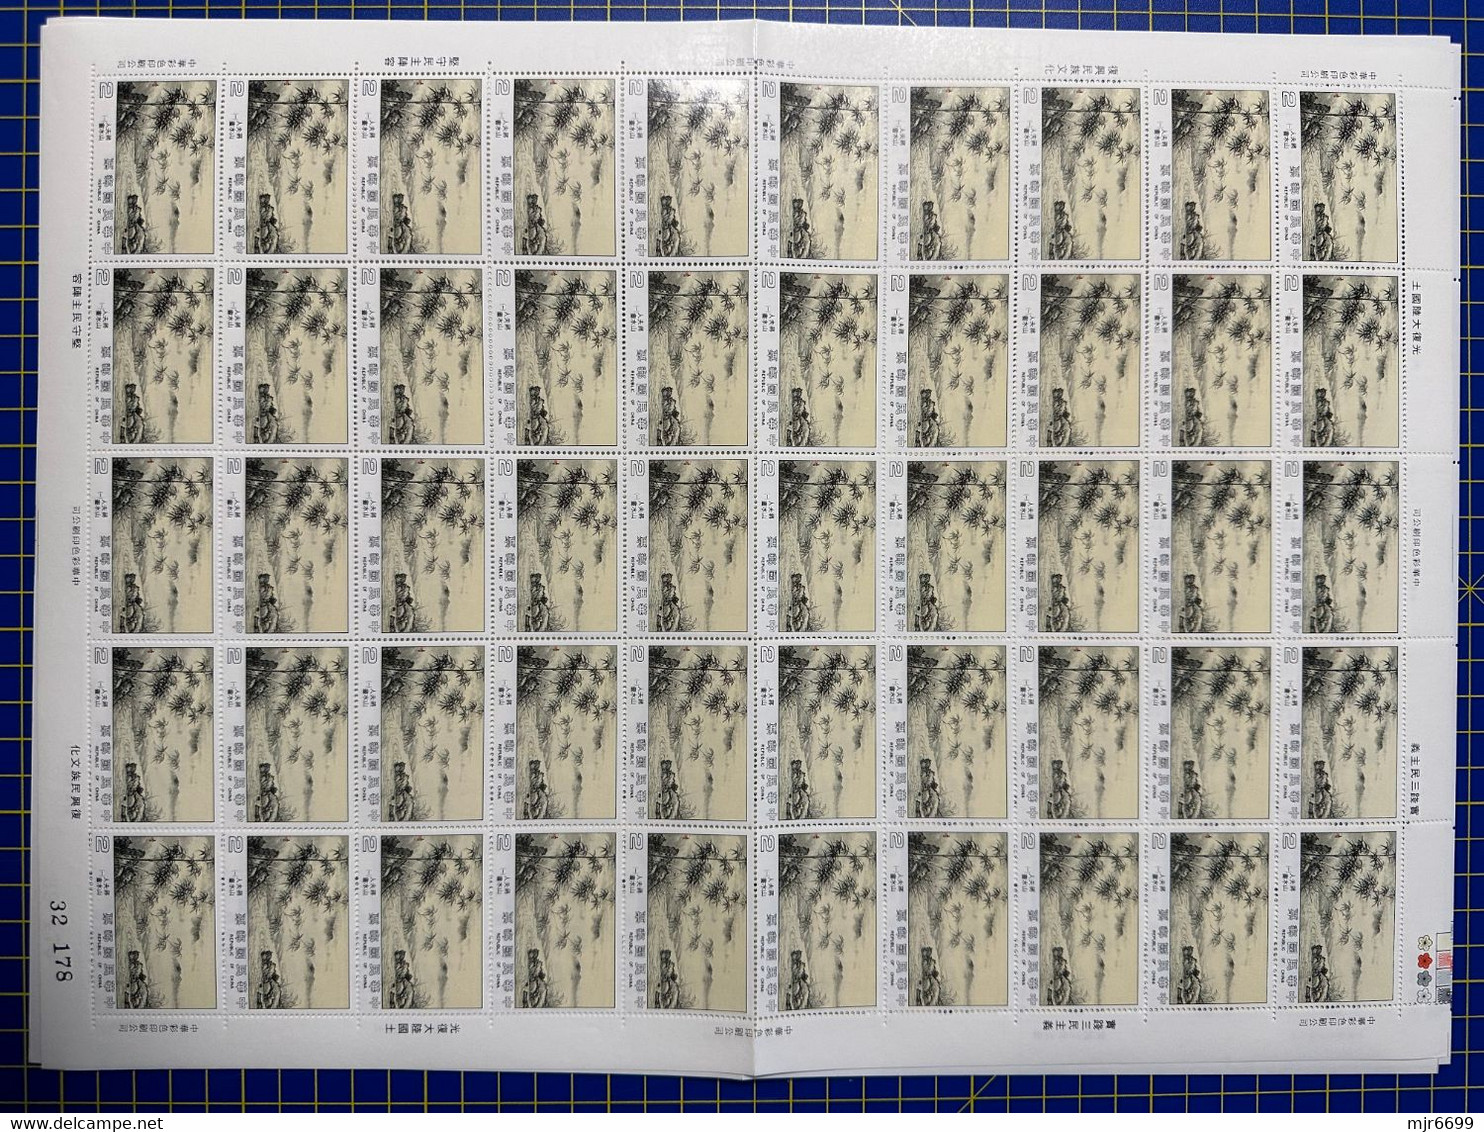 REPUBLIC OF CHINA/TAIWAN "MADAME CHIANG KAI-SHEK'S LANDSCAPE PAINTING STAMPS" SET OF 10, IN FOLDED SHEET OF 50 SETS - Collections, Lots & Series